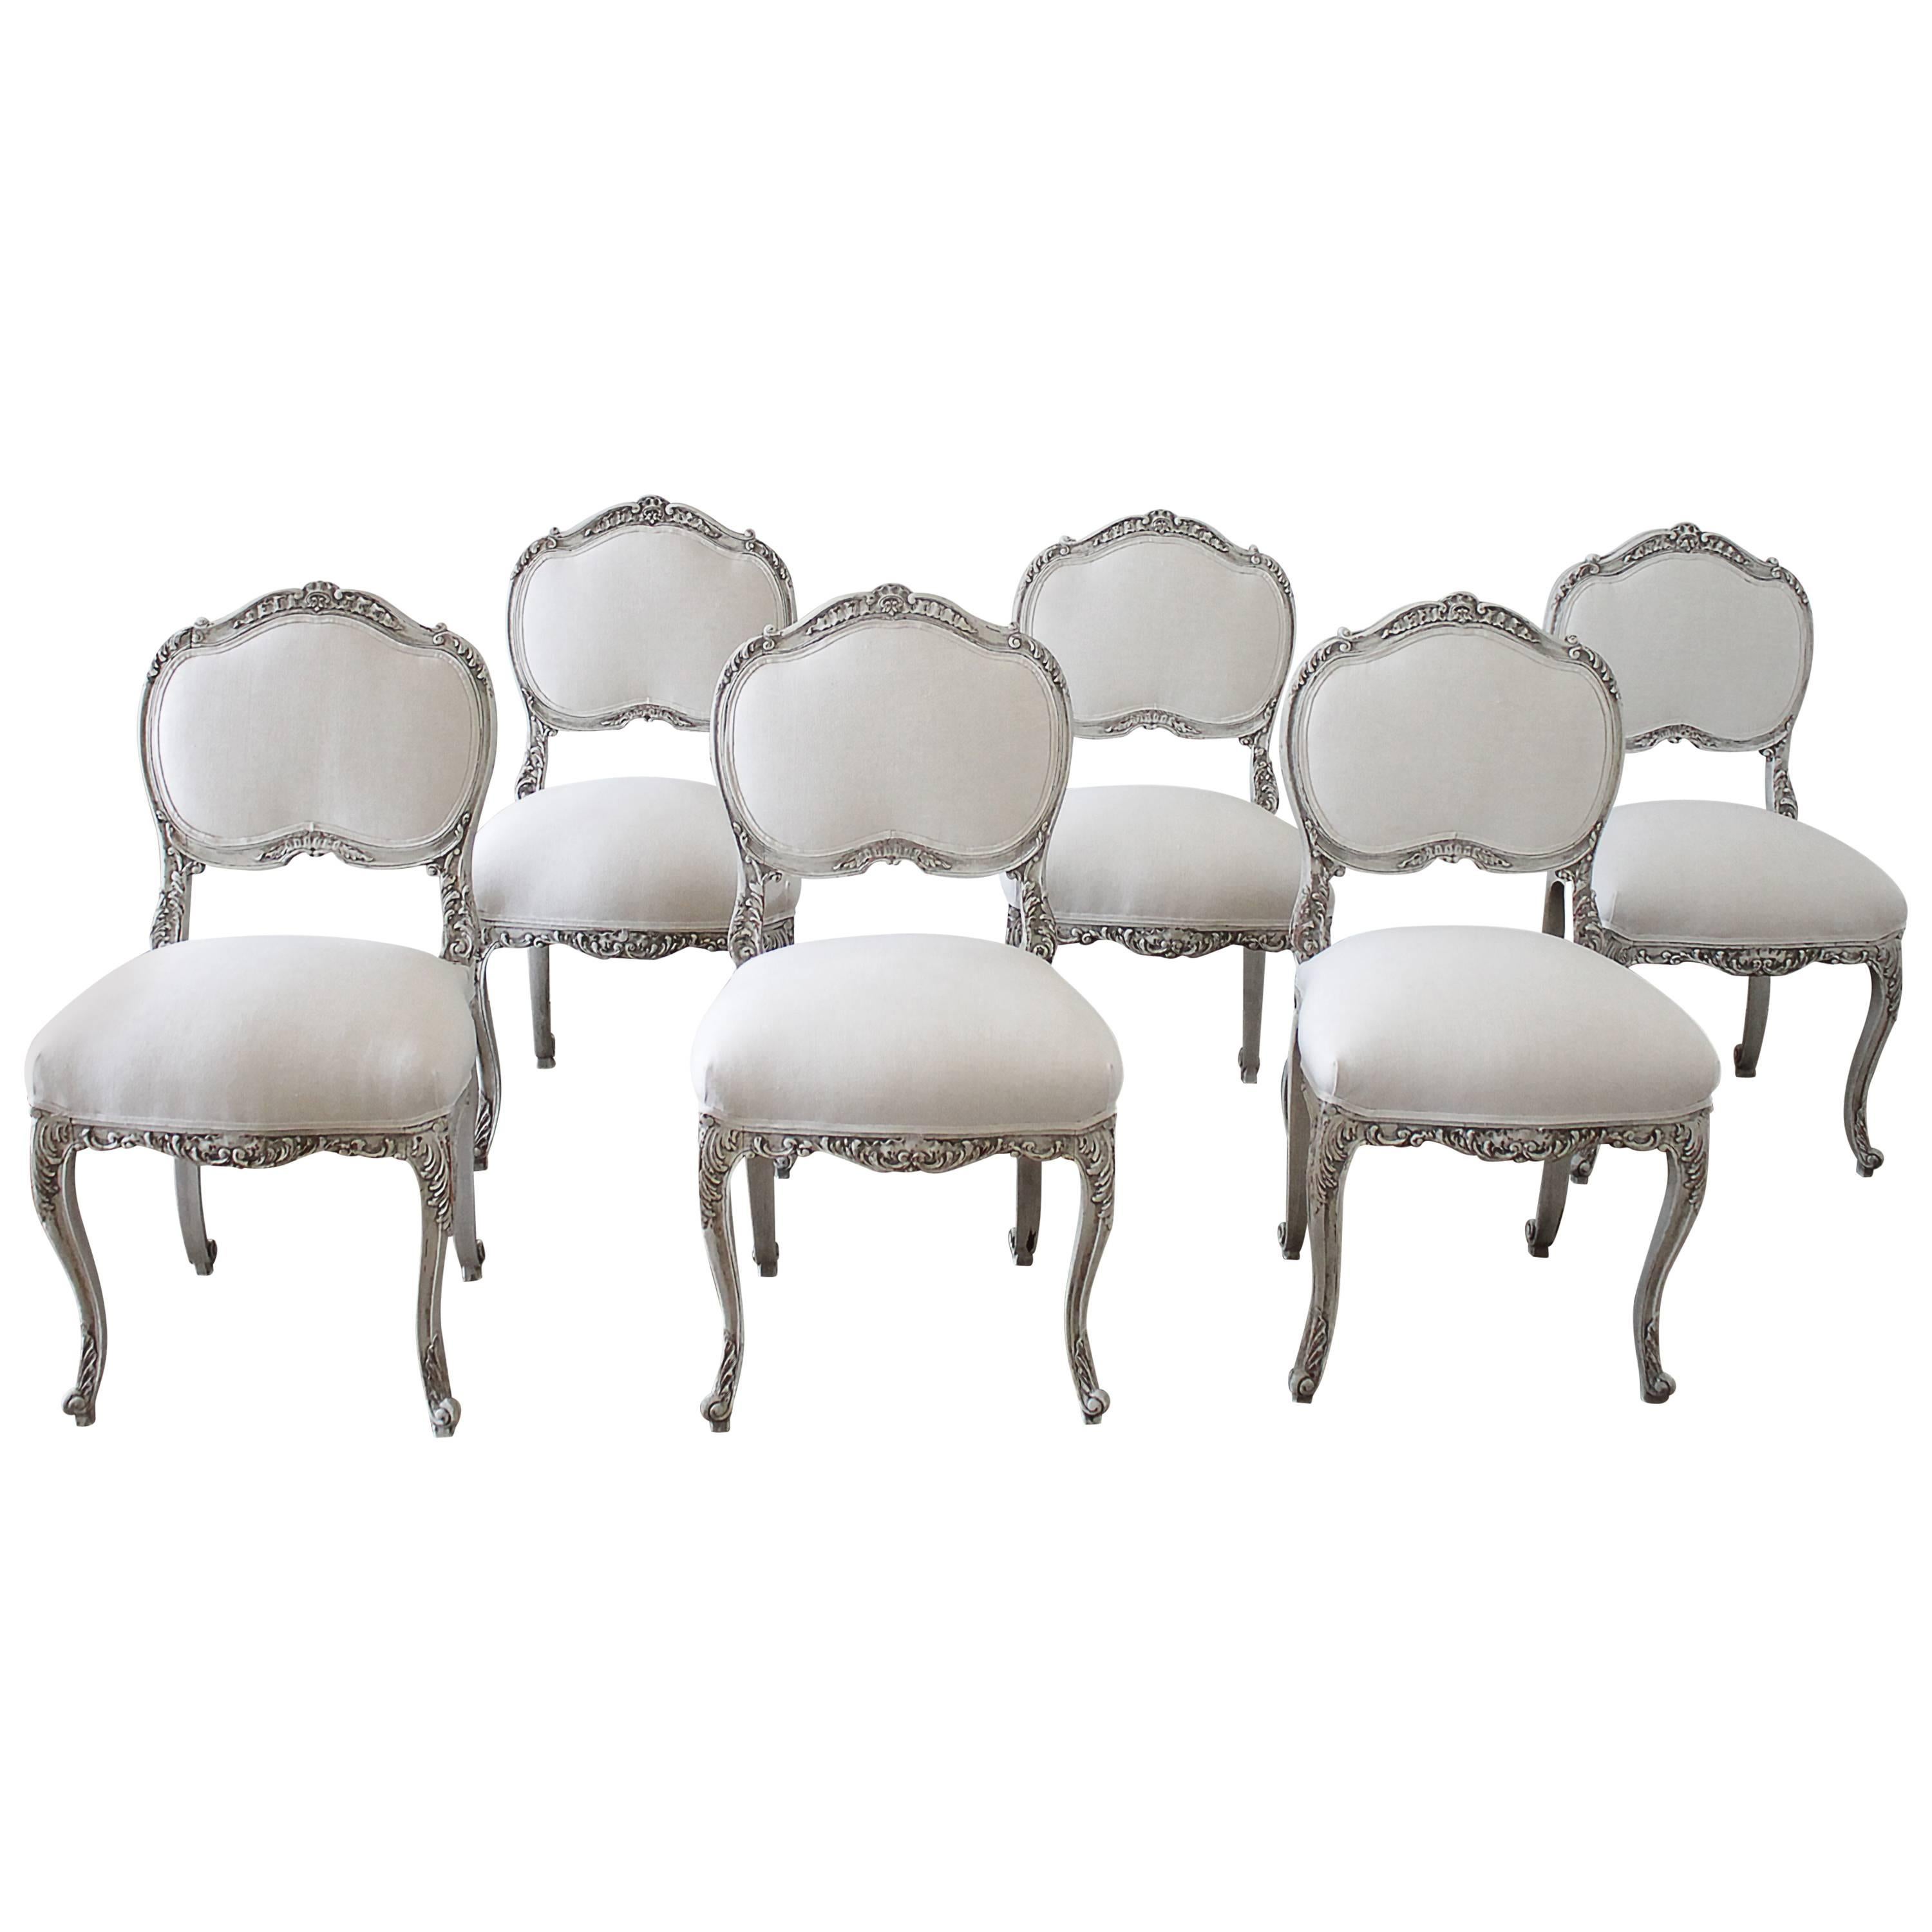 Late 19th Century Set of 6 French Louis XV Dining Chairs